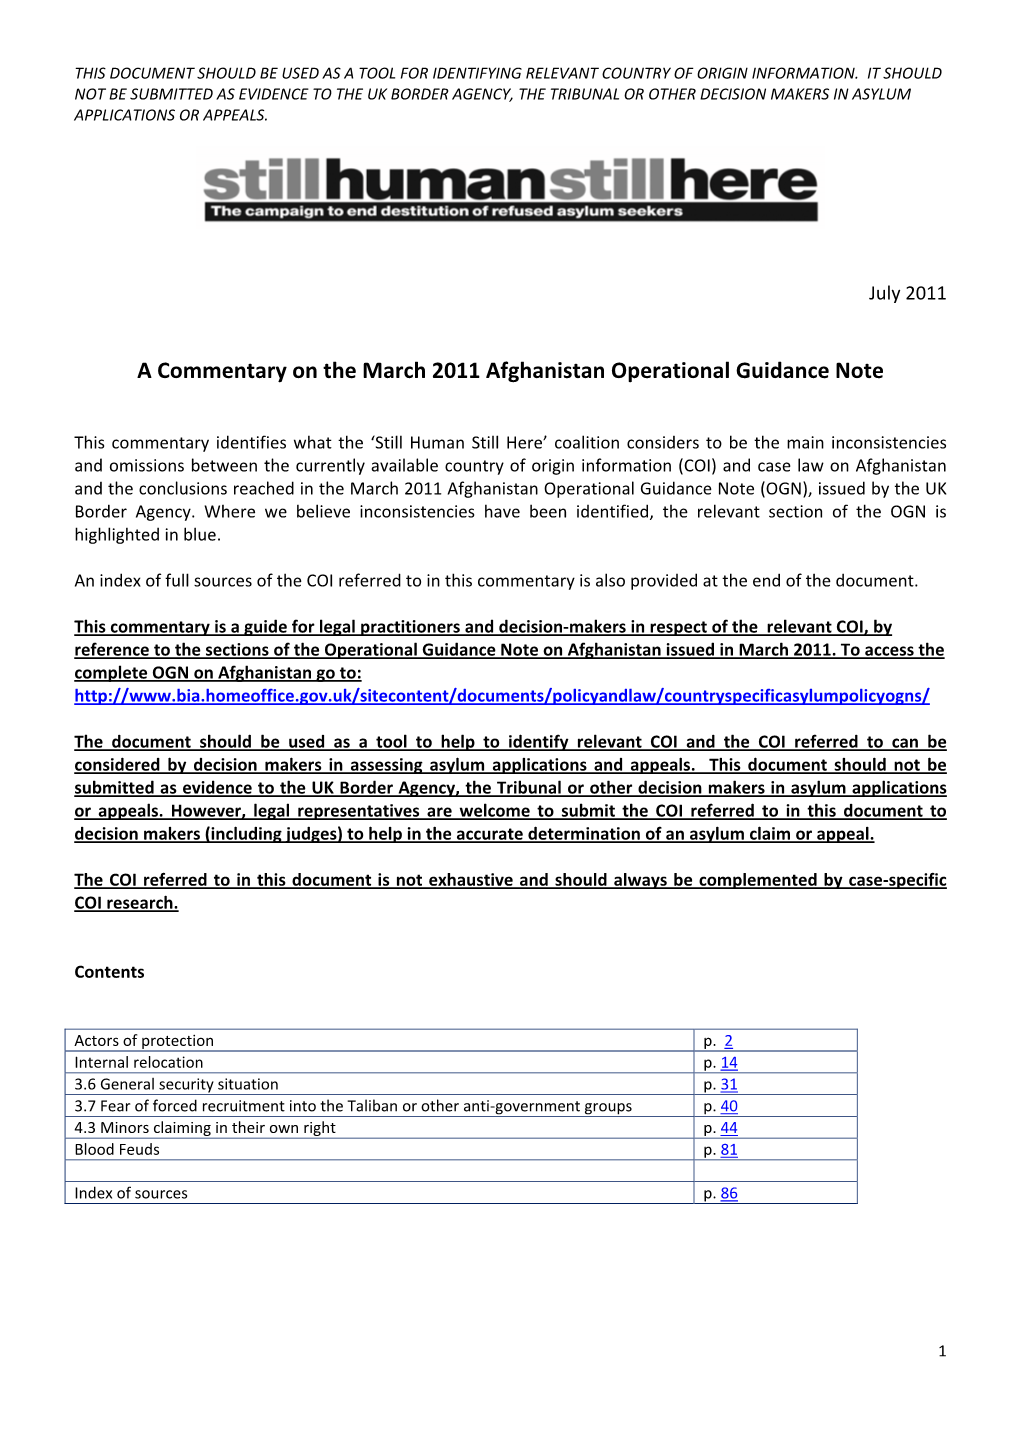 A Commentary on the March 2011 Afghanistan Operational Guidance Note